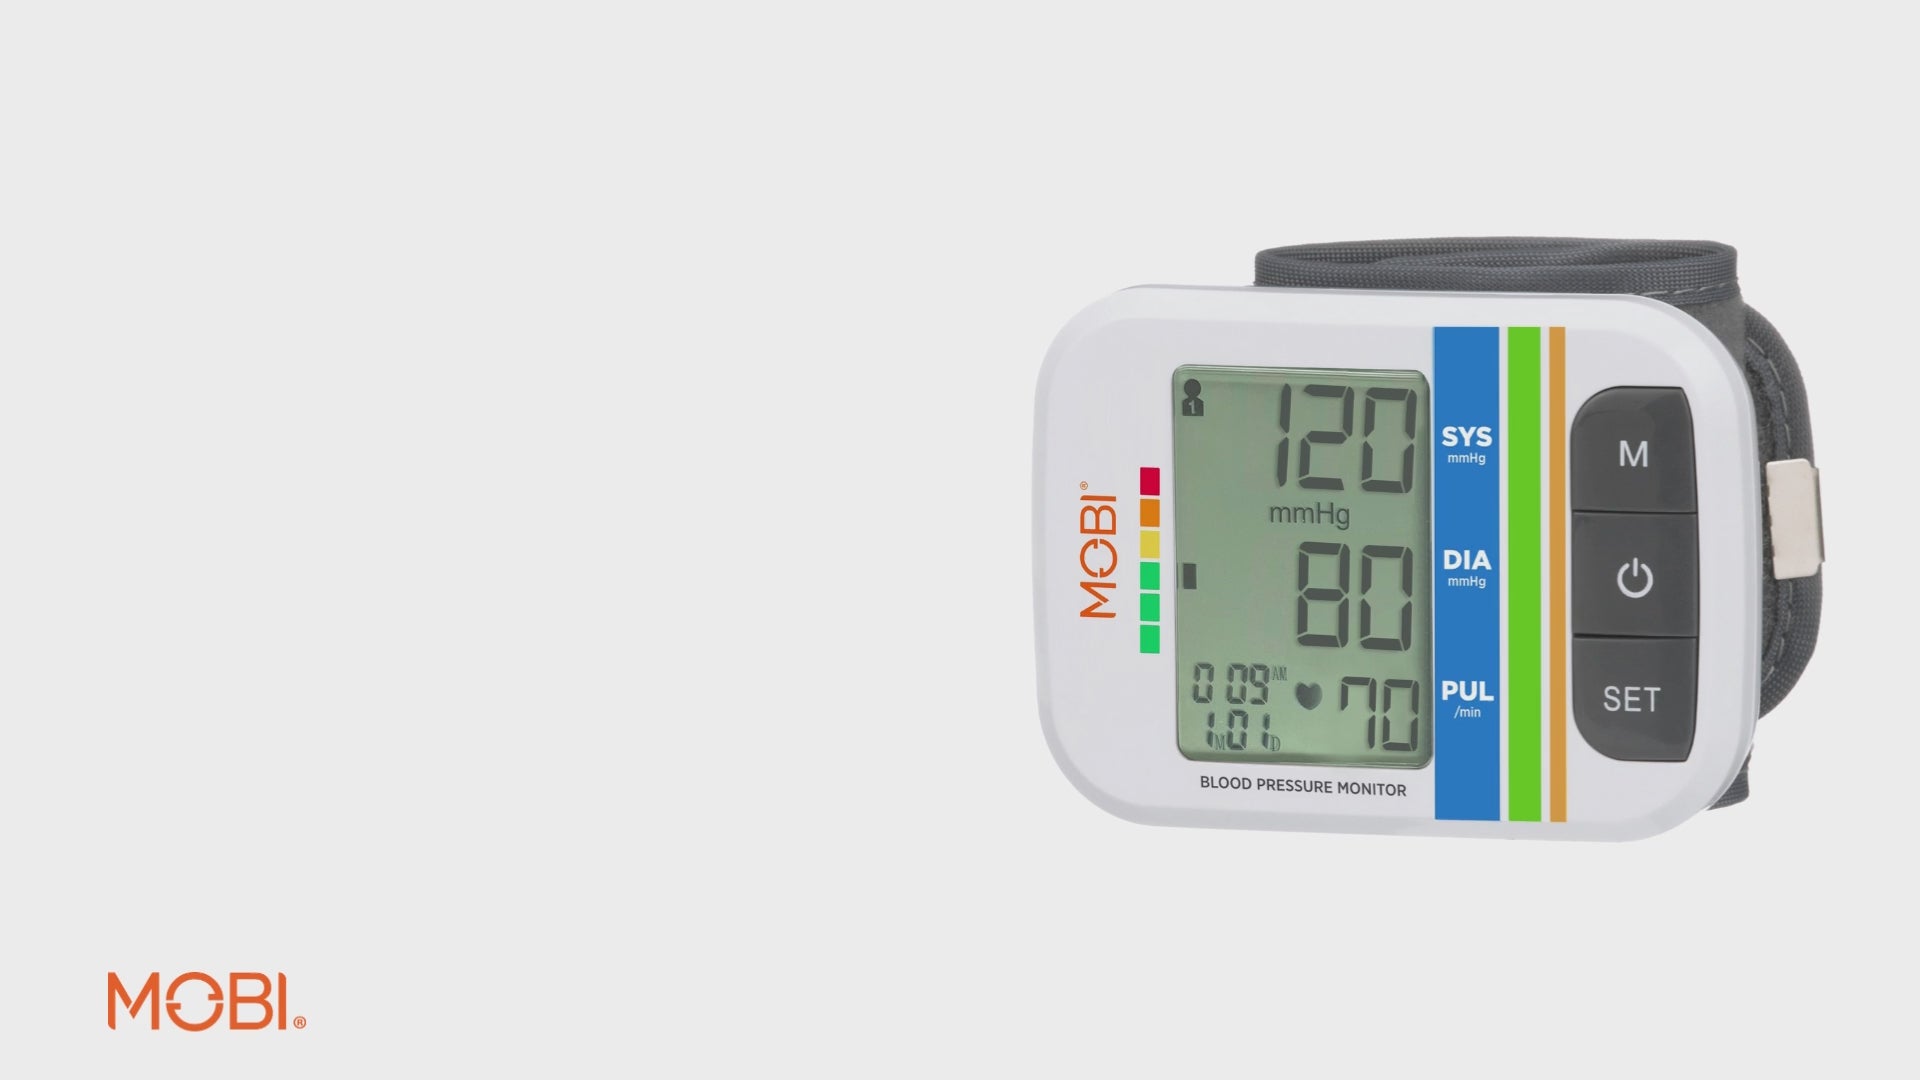 Omron Series 10 Smart Blood Pressure Monitor - health and beauty